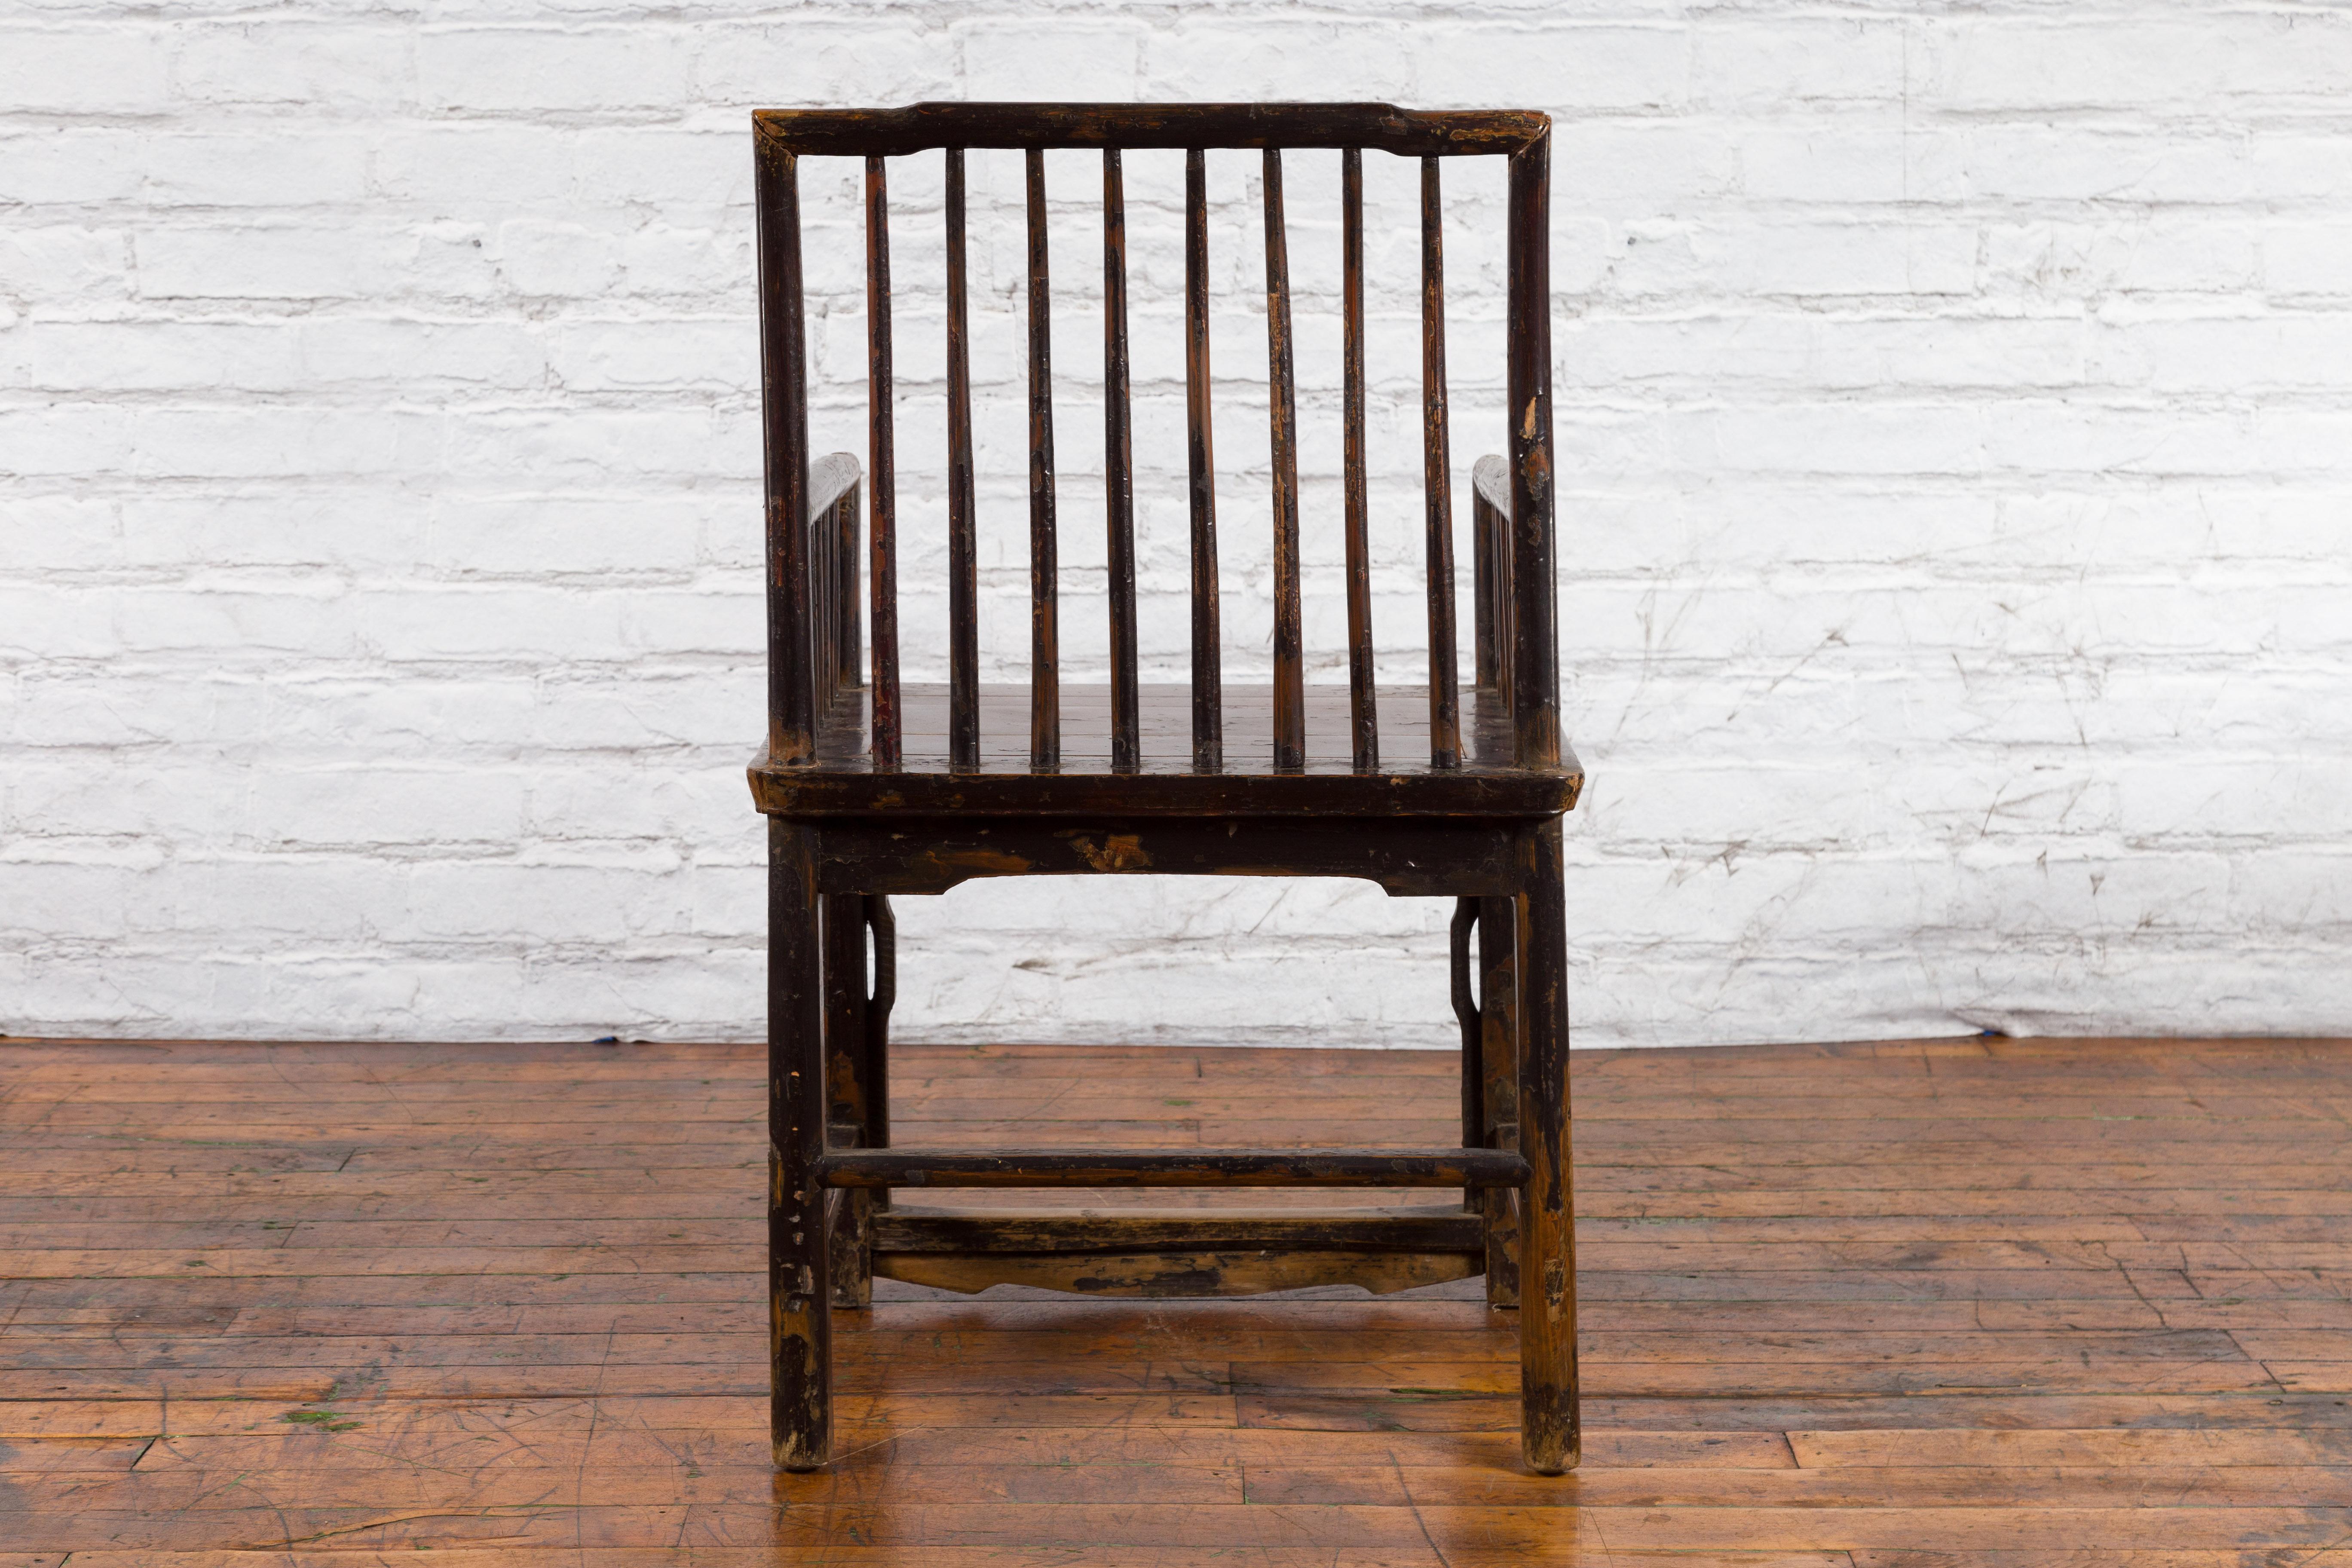 Chinese Qing Dynasty 19th Century Elmwood Armchair with Slatted Back and Arms For Sale 2